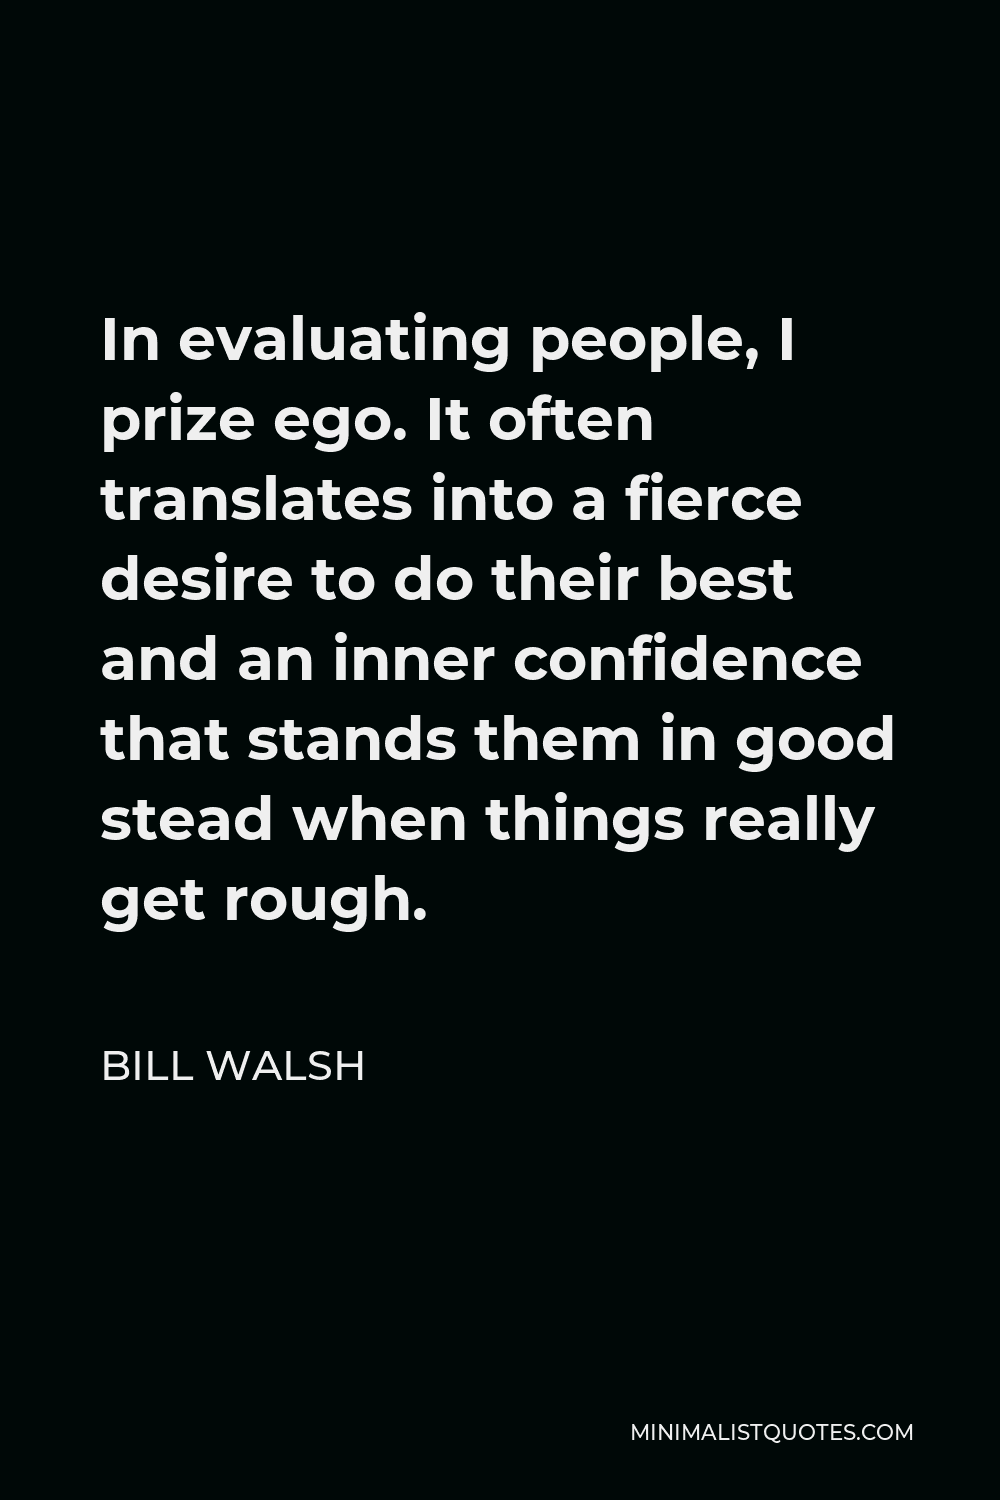 Bill Walsh Quote - In evaluating people, I prize ego. It often translates into a fierce desire to do their best and an inner confidence that stands them in good stead when things really get rough.